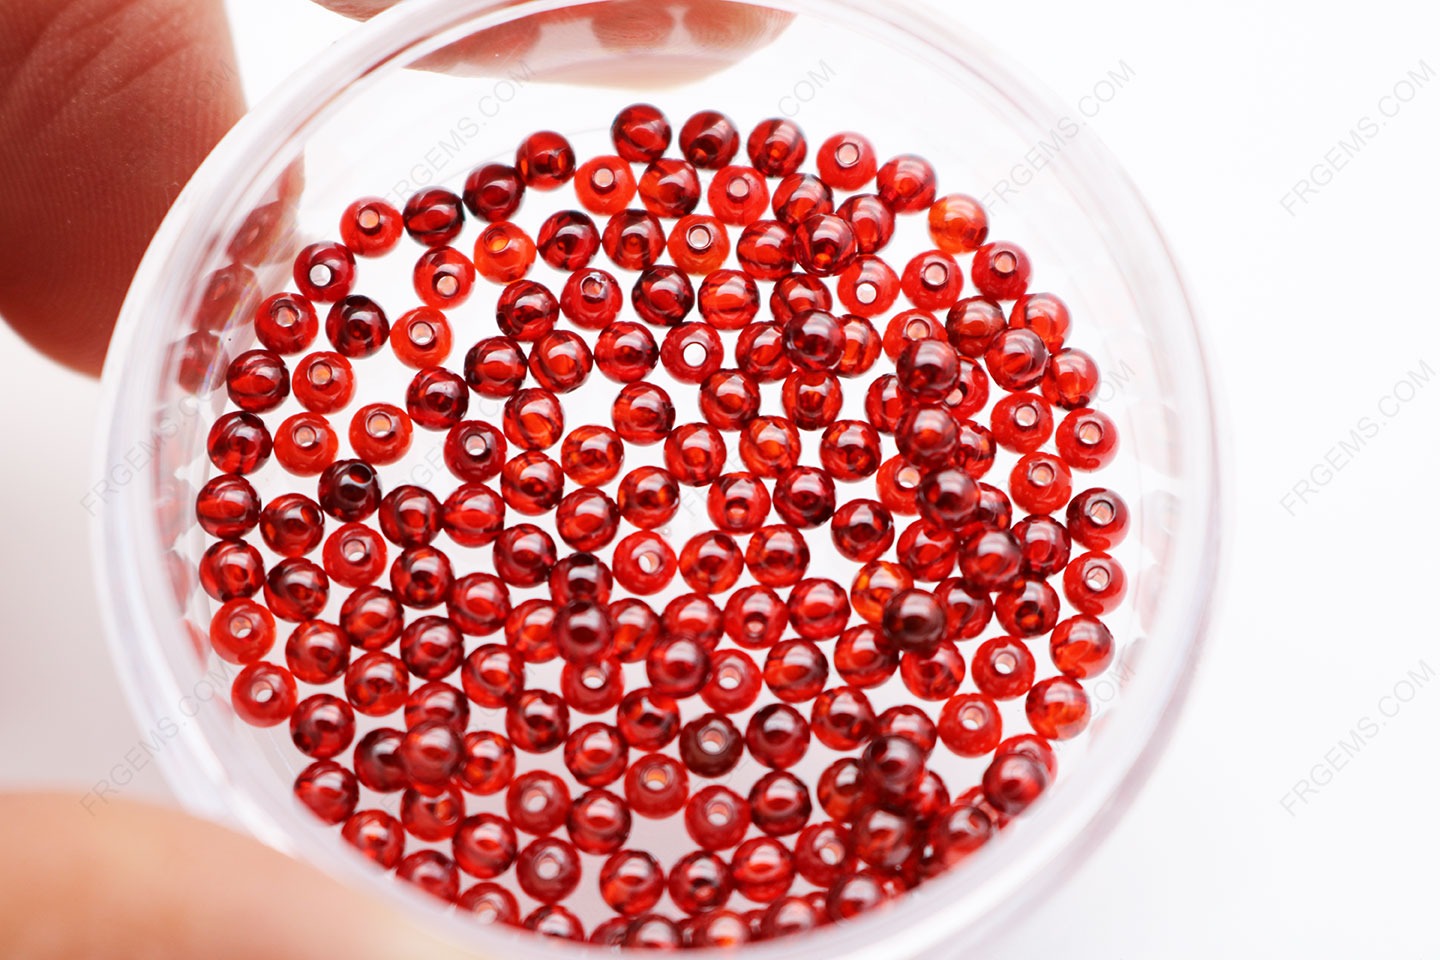 Cubic Zirconia Garnet Red Round Smooth Ball drilled Holes 3mm stones CZ22 IMG_0800